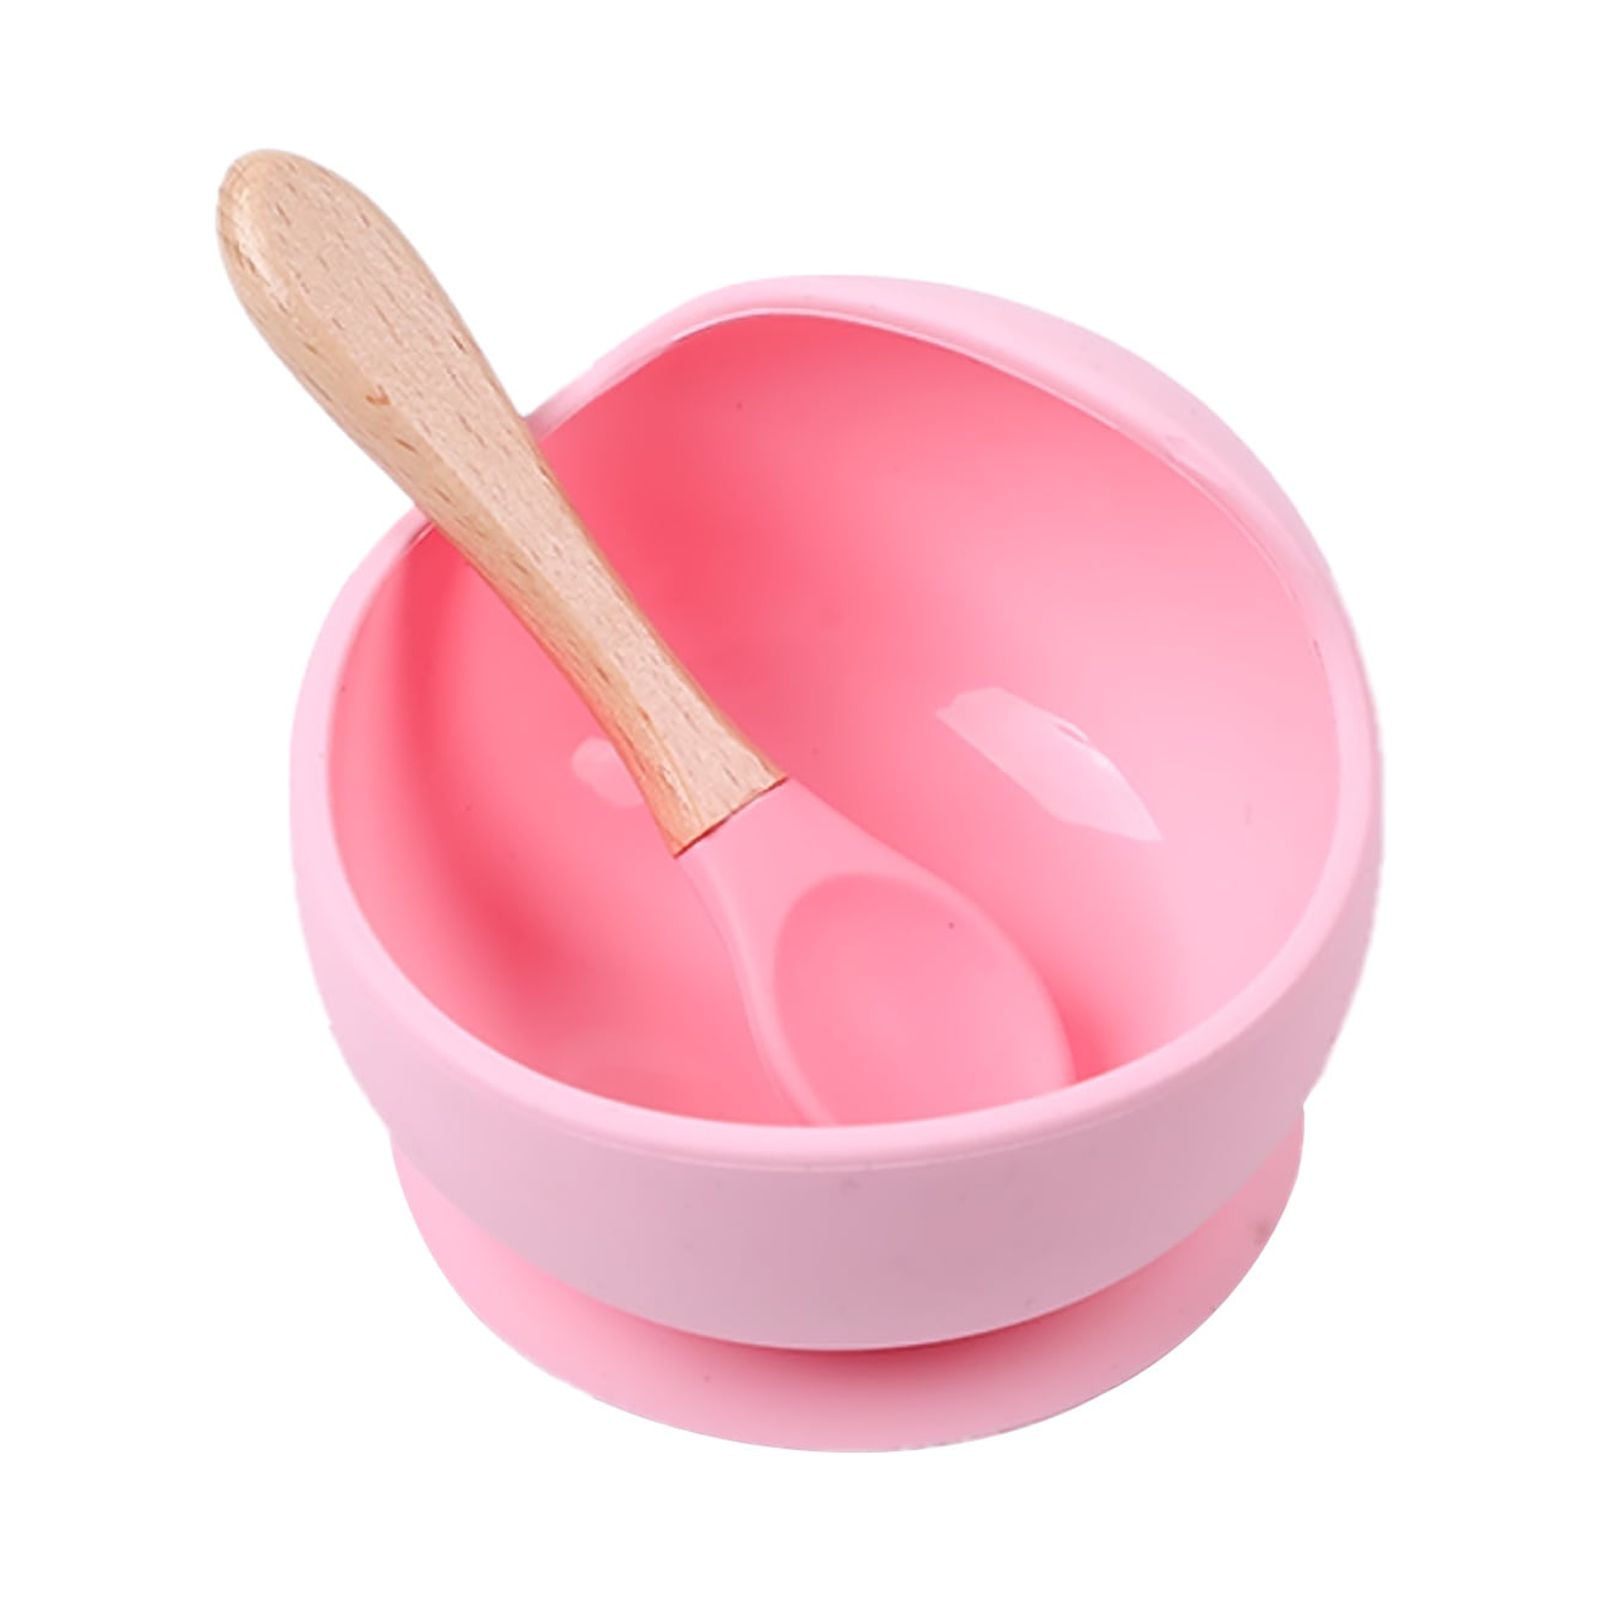 Upward Baby Silicone Bowl 3Pc Set With Spoon Multi, one size - Kroger